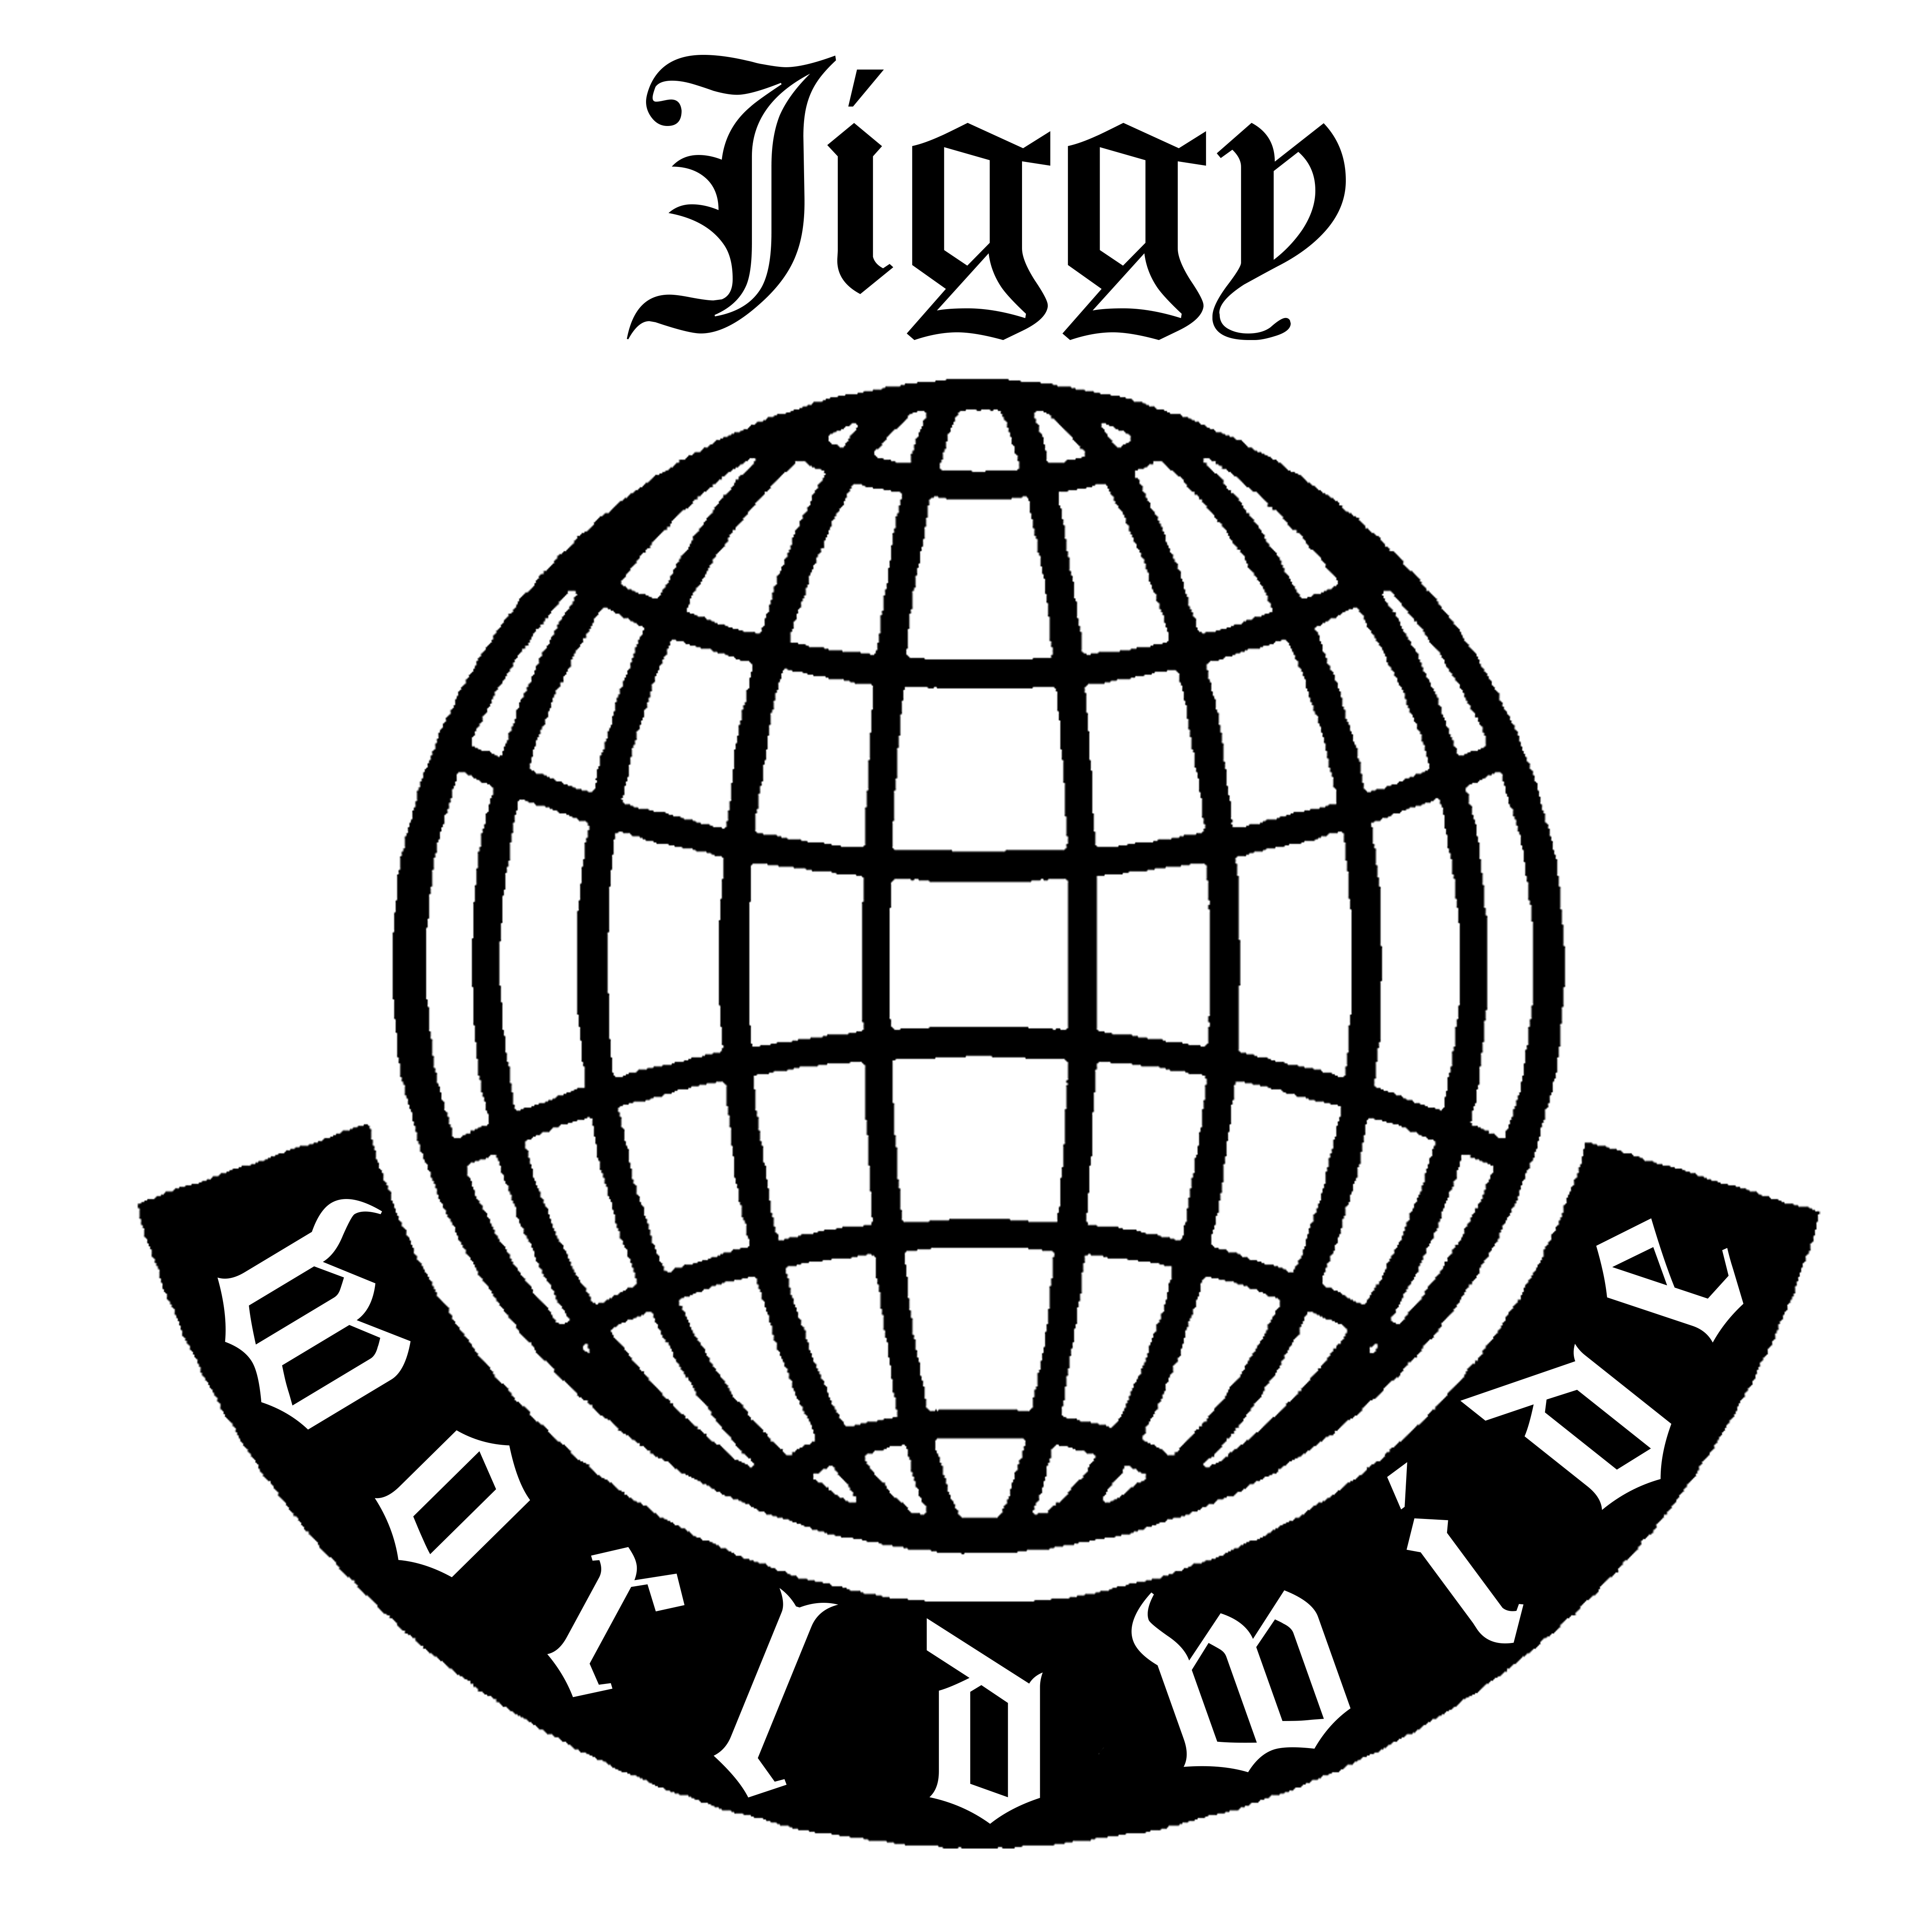 Download MCM Worldwide Logo PNG and Vector (PDF, SVG, Ai, EPS) Free